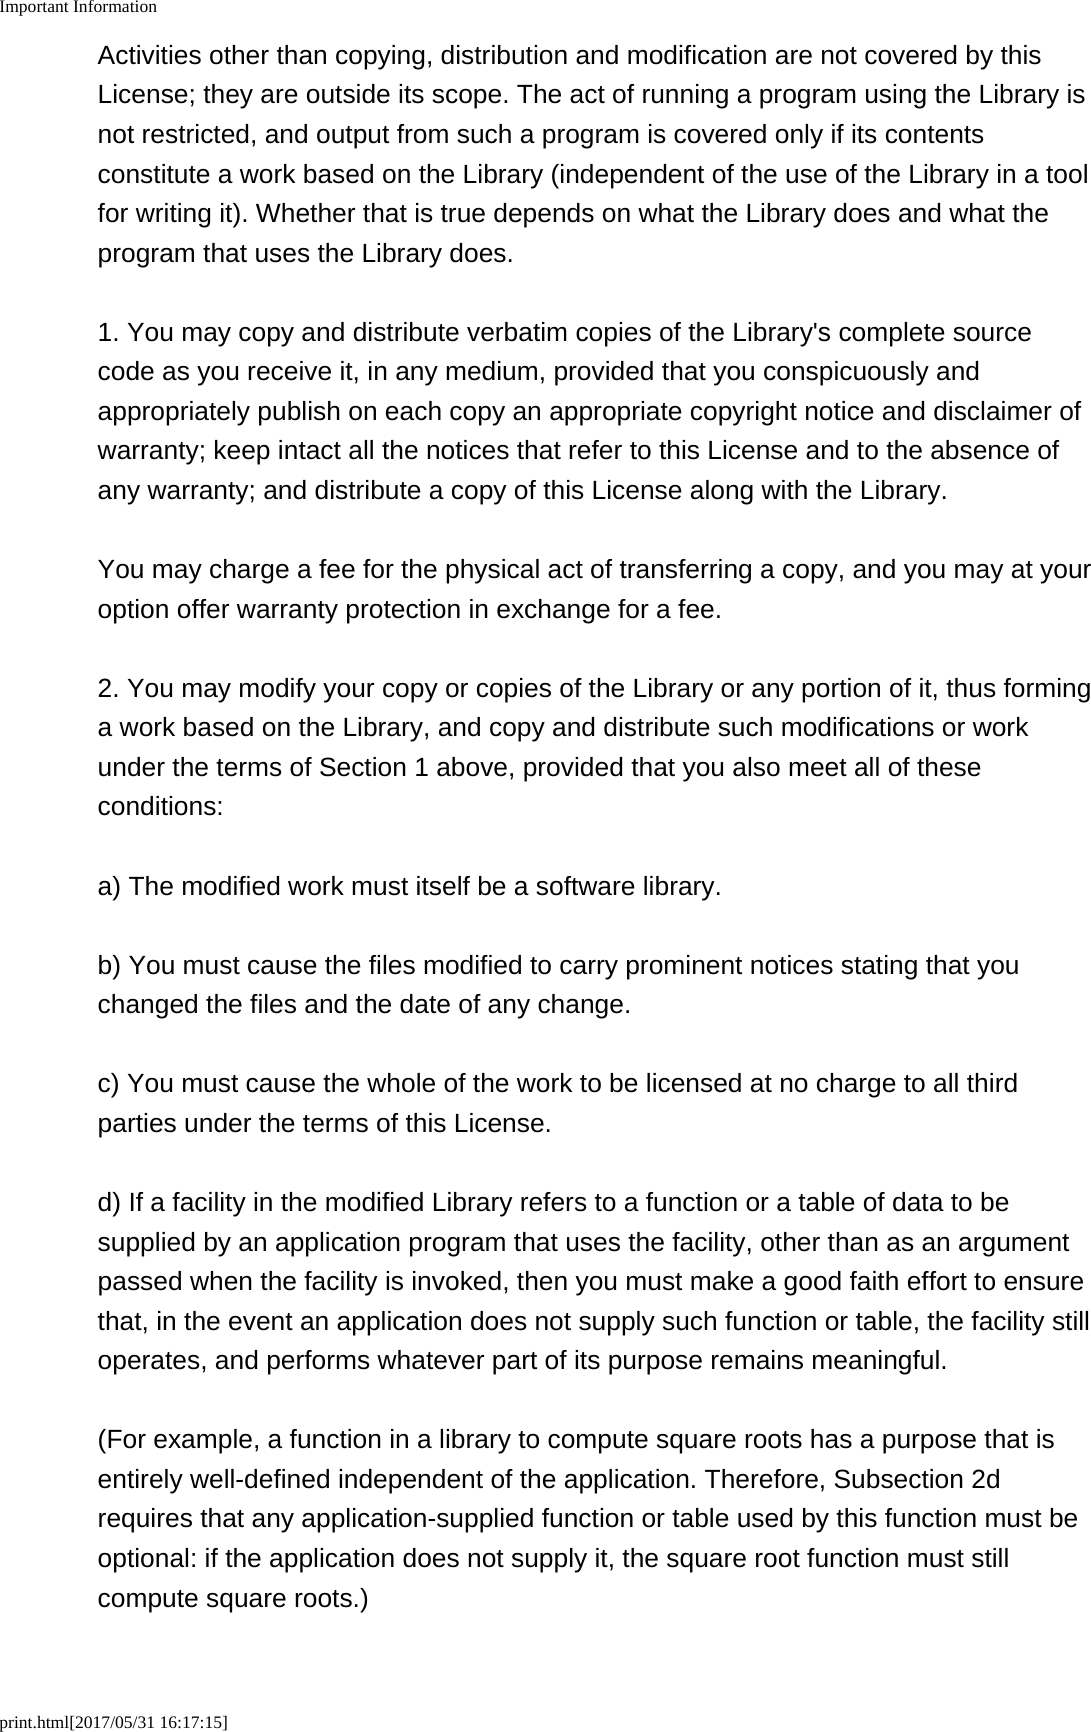 Important Informationprint.html[2017/05/31 16:17:15]Activities other than copying, distribution and modification are not covered by thisLicense; they are outside its scope. The act of running a program using the Library isnot restricted, and output from such a program is covered only if its contentsconstitute a work based on the Library (independent of the use of the Library in a toolfor writing it). Whether that is true depends on what the Library does and what theprogram that uses the Library does.1. You may copy and distribute verbatim copies of the Library&apos;s complete sourcecode as you receive it, in any medium, provided that you conspicuously andappropriately publish on each copy an appropriate copyright notice and disclaimer ofwarranty; keep intact all the notices that refer to this License and to the absence ofany warranty; and distribute a copy of this License along with the Library.You may charge a fee for the physical act of transferring a copy, and you may at youroption offer warranty protection in exchange for a fee.2. You may modify your copy or copies of the Library or any portion of it, thus forminga work based on the Library, and copy and distribute such modifications or workunder the terms of Section 1 above, provided that you also meet all of theseconditions:a) The modified work must itself be a software library.b) You must cause the files modified to carry prominent notices stating that youchanged the files and the date of any change.c) You must cause the whole of the work to be licensed at no charge to all thirdparties under the terms of this License.d) If a facility in the modified Library refers to a function or a table of data to besupplied by an application program that uses the facility, other than as an argumentpassed when the facility is invoked, then you must make a good faith effort to ensurethat, in the event an application does not supply such function or table, the facility stilloperates, and performs whatever part of its purpose remains meaningful.(For example, a function in a library to compute square roots has a purpose that isentirely well-defined independent of the application. Therefore, Subsection 2drequires that any application-supplied function or table used by this function must beoptional: if the application does not supply it, the square root function must stillcompute square roots.)